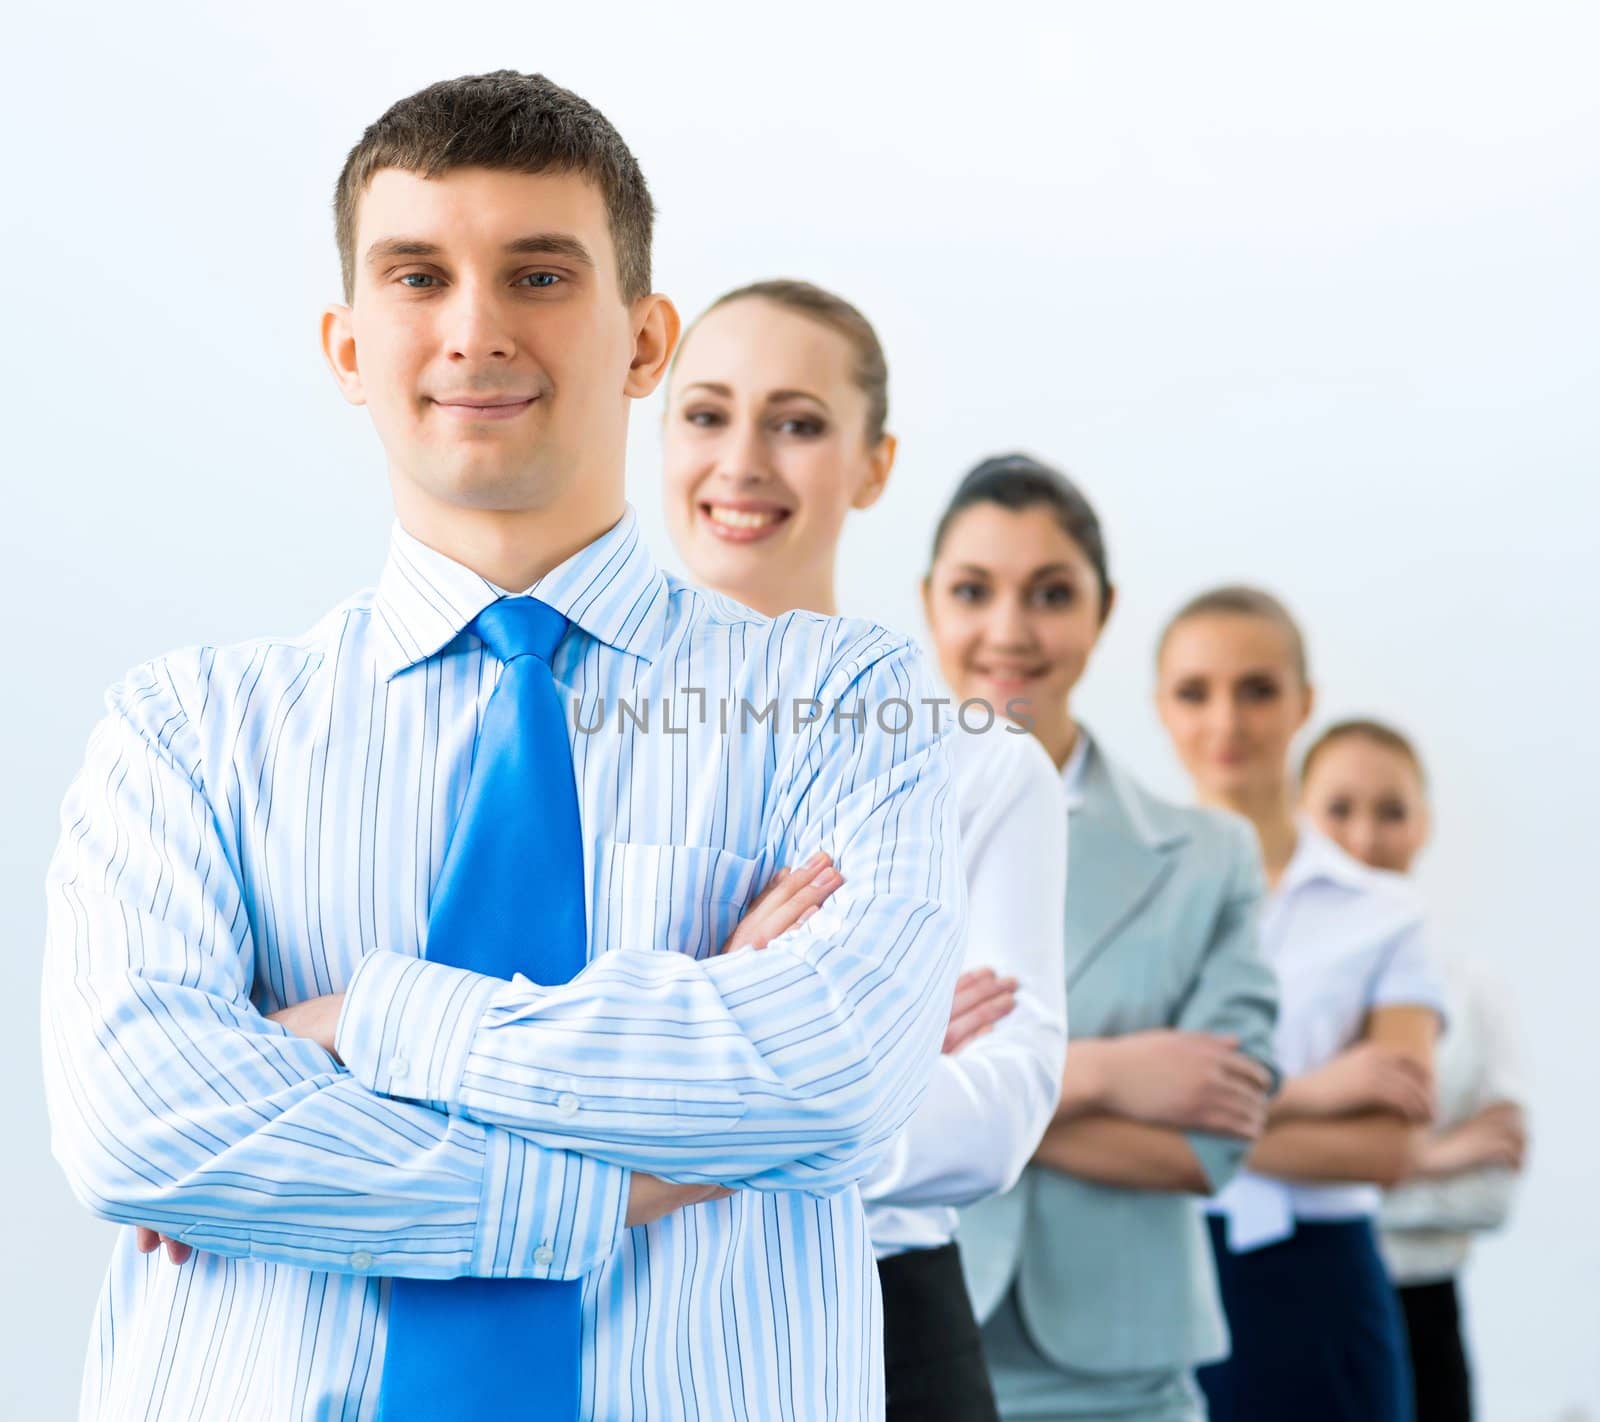 group of business people standing in a row, smiling and crossing his arms